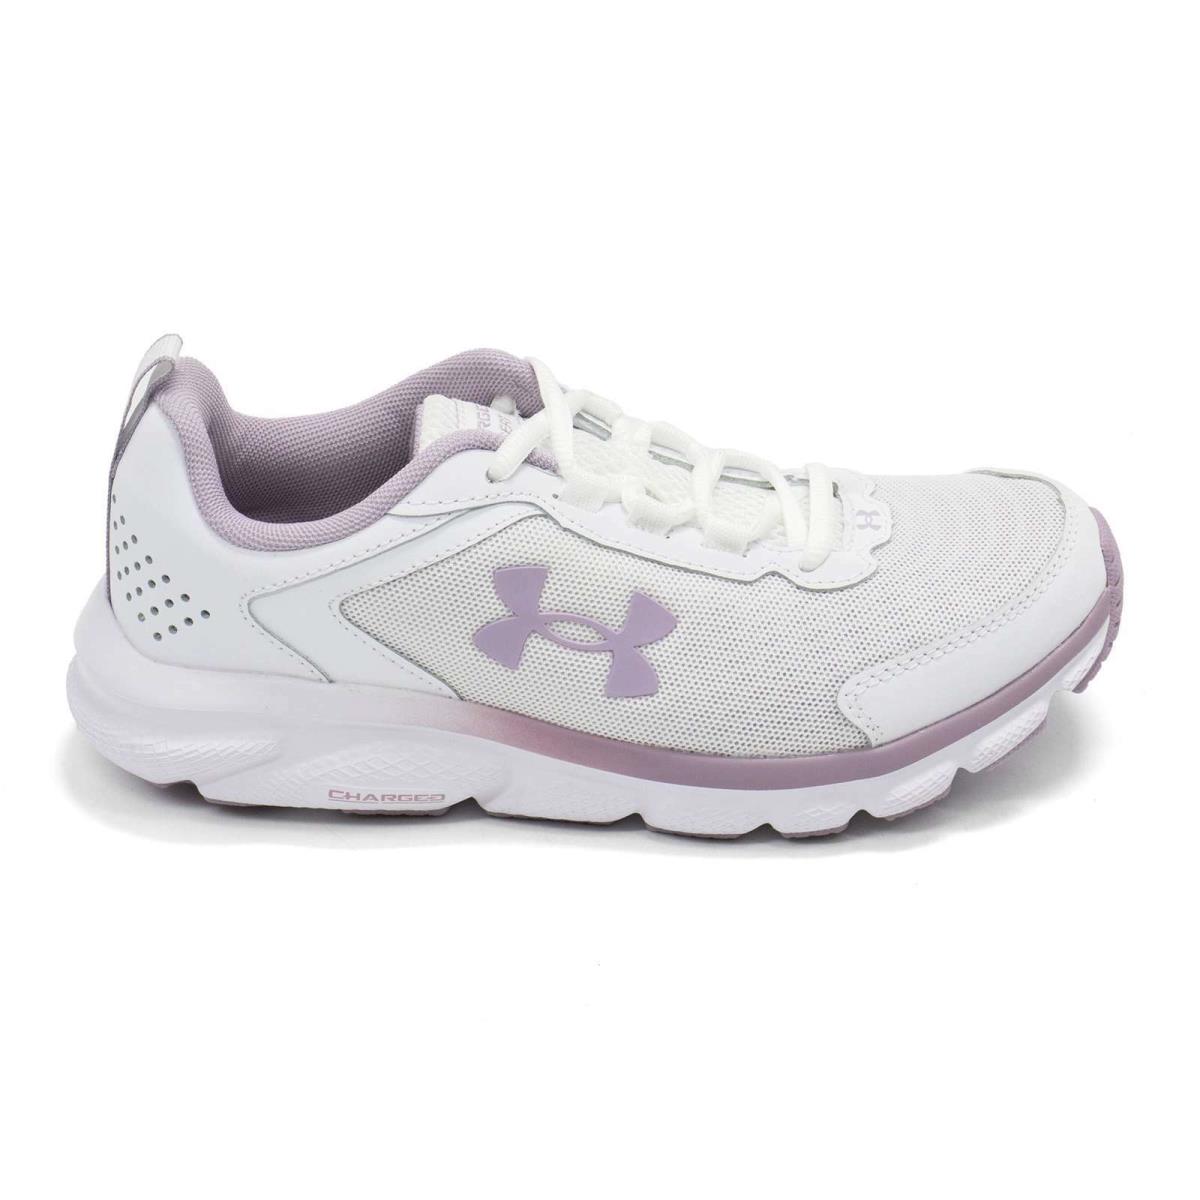 Under Armour Women`s UA Charged Assert 9 Training Running Athletic Shoes White/Mauve Pink